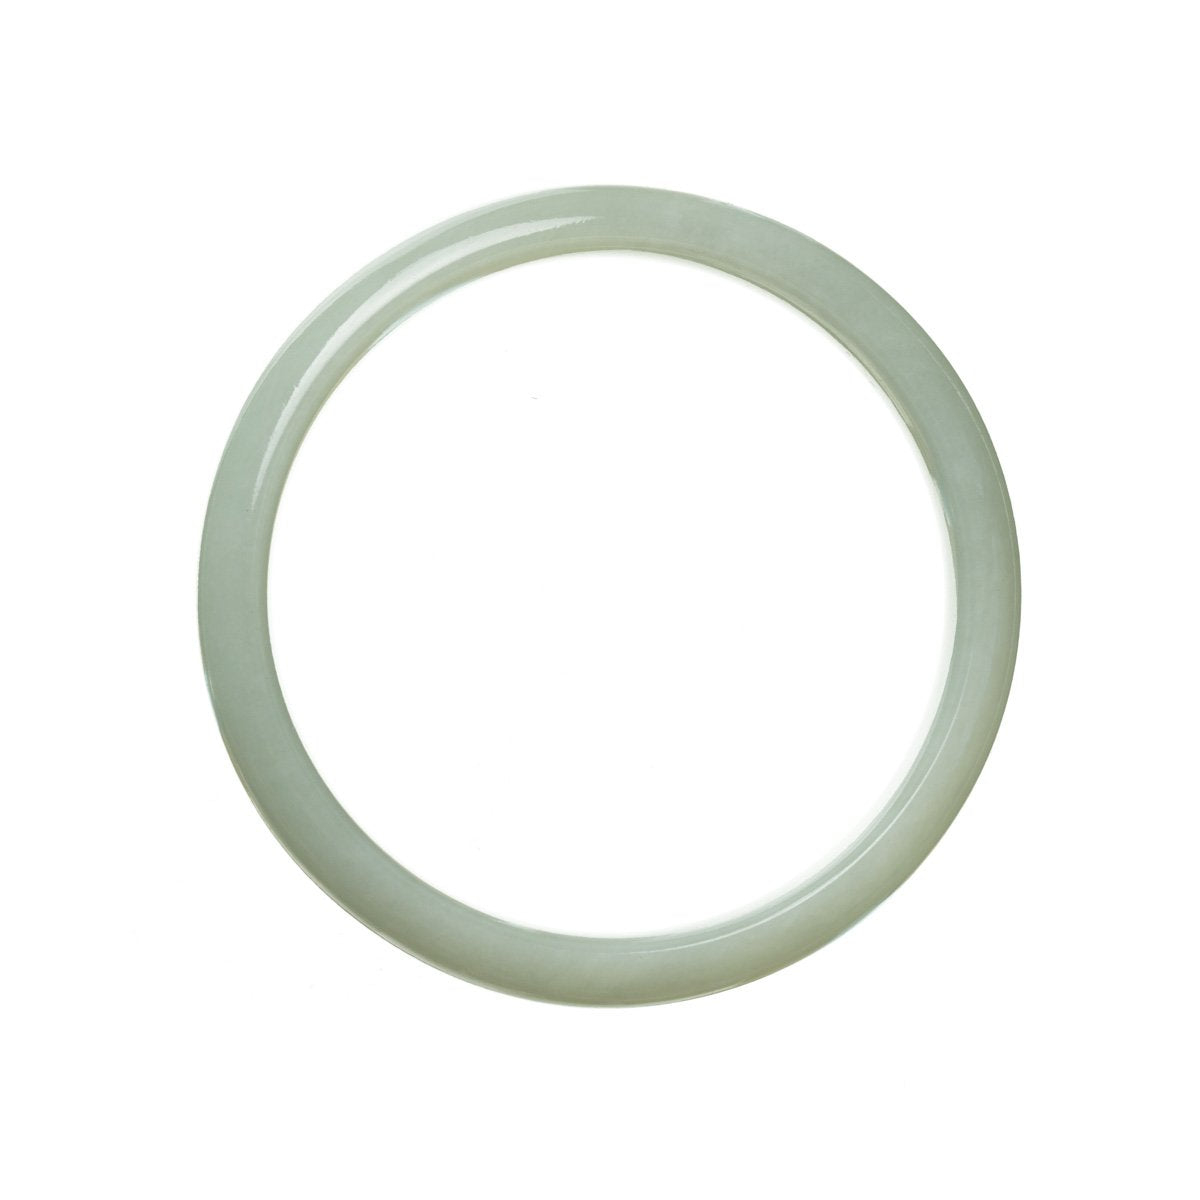 A pale green traditional jade bangle with a semi-round shape, measuring 56mm. Made from genuine grade A jade.